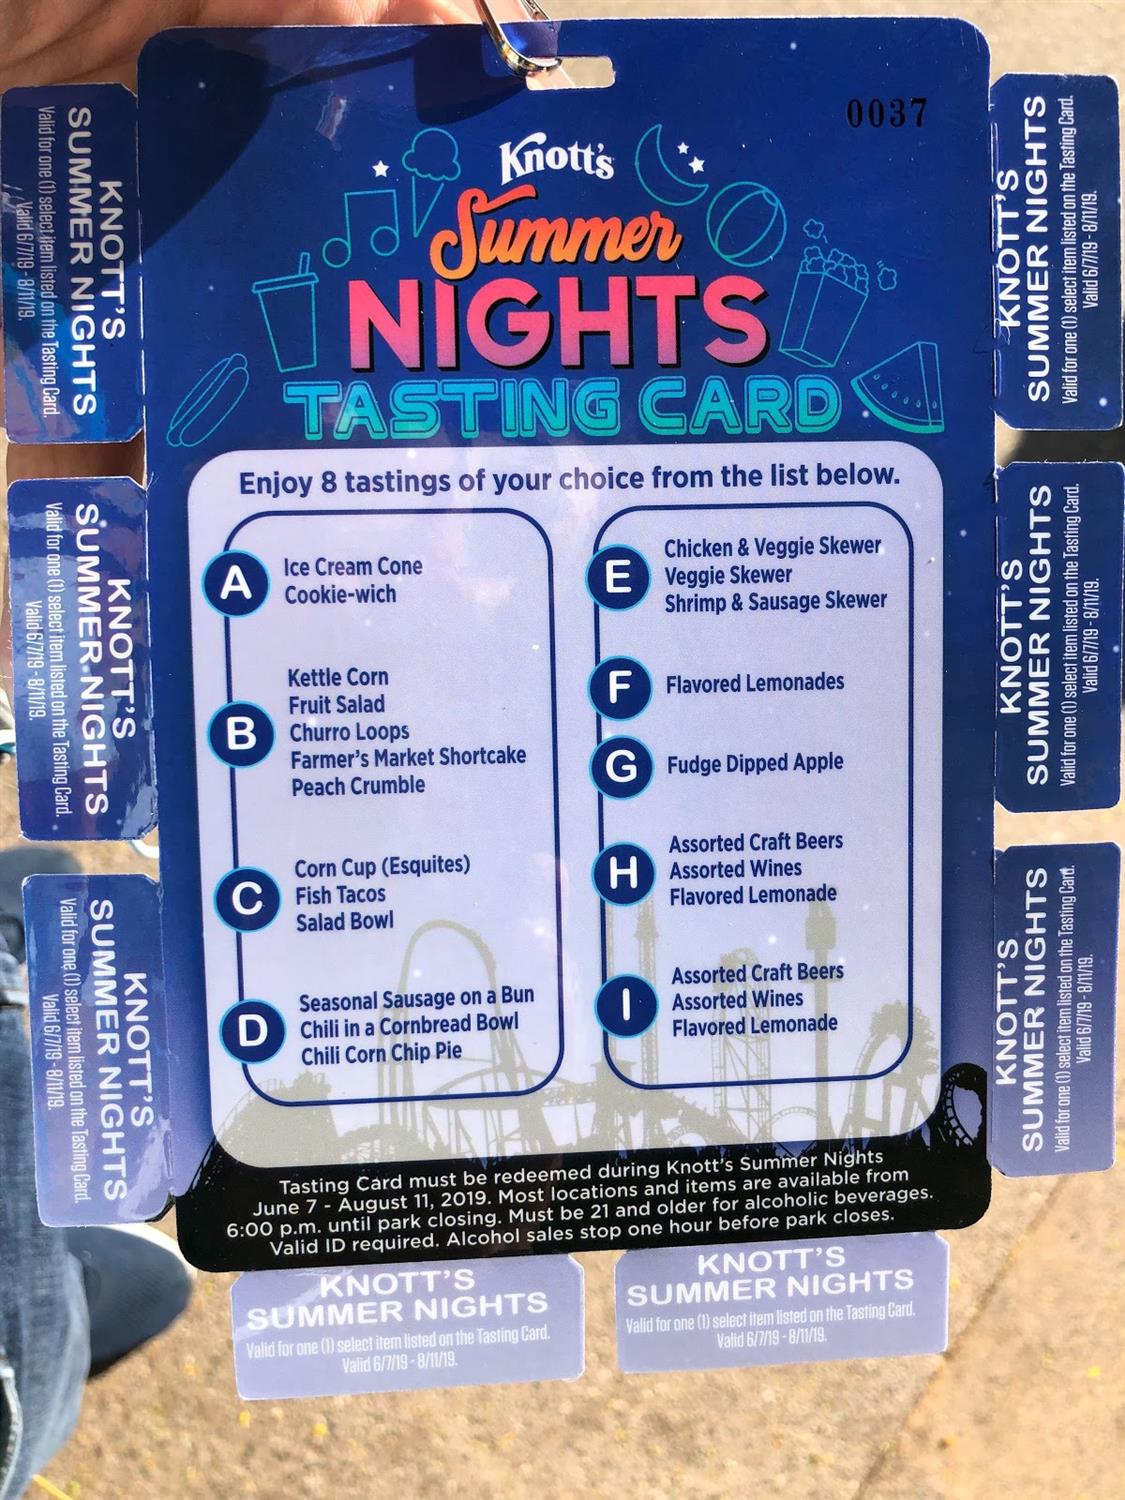 knotts-summer-nights-brings-live-music-specialty-food-and-fun-games-to-knotts-berry-farm-8.jpeg